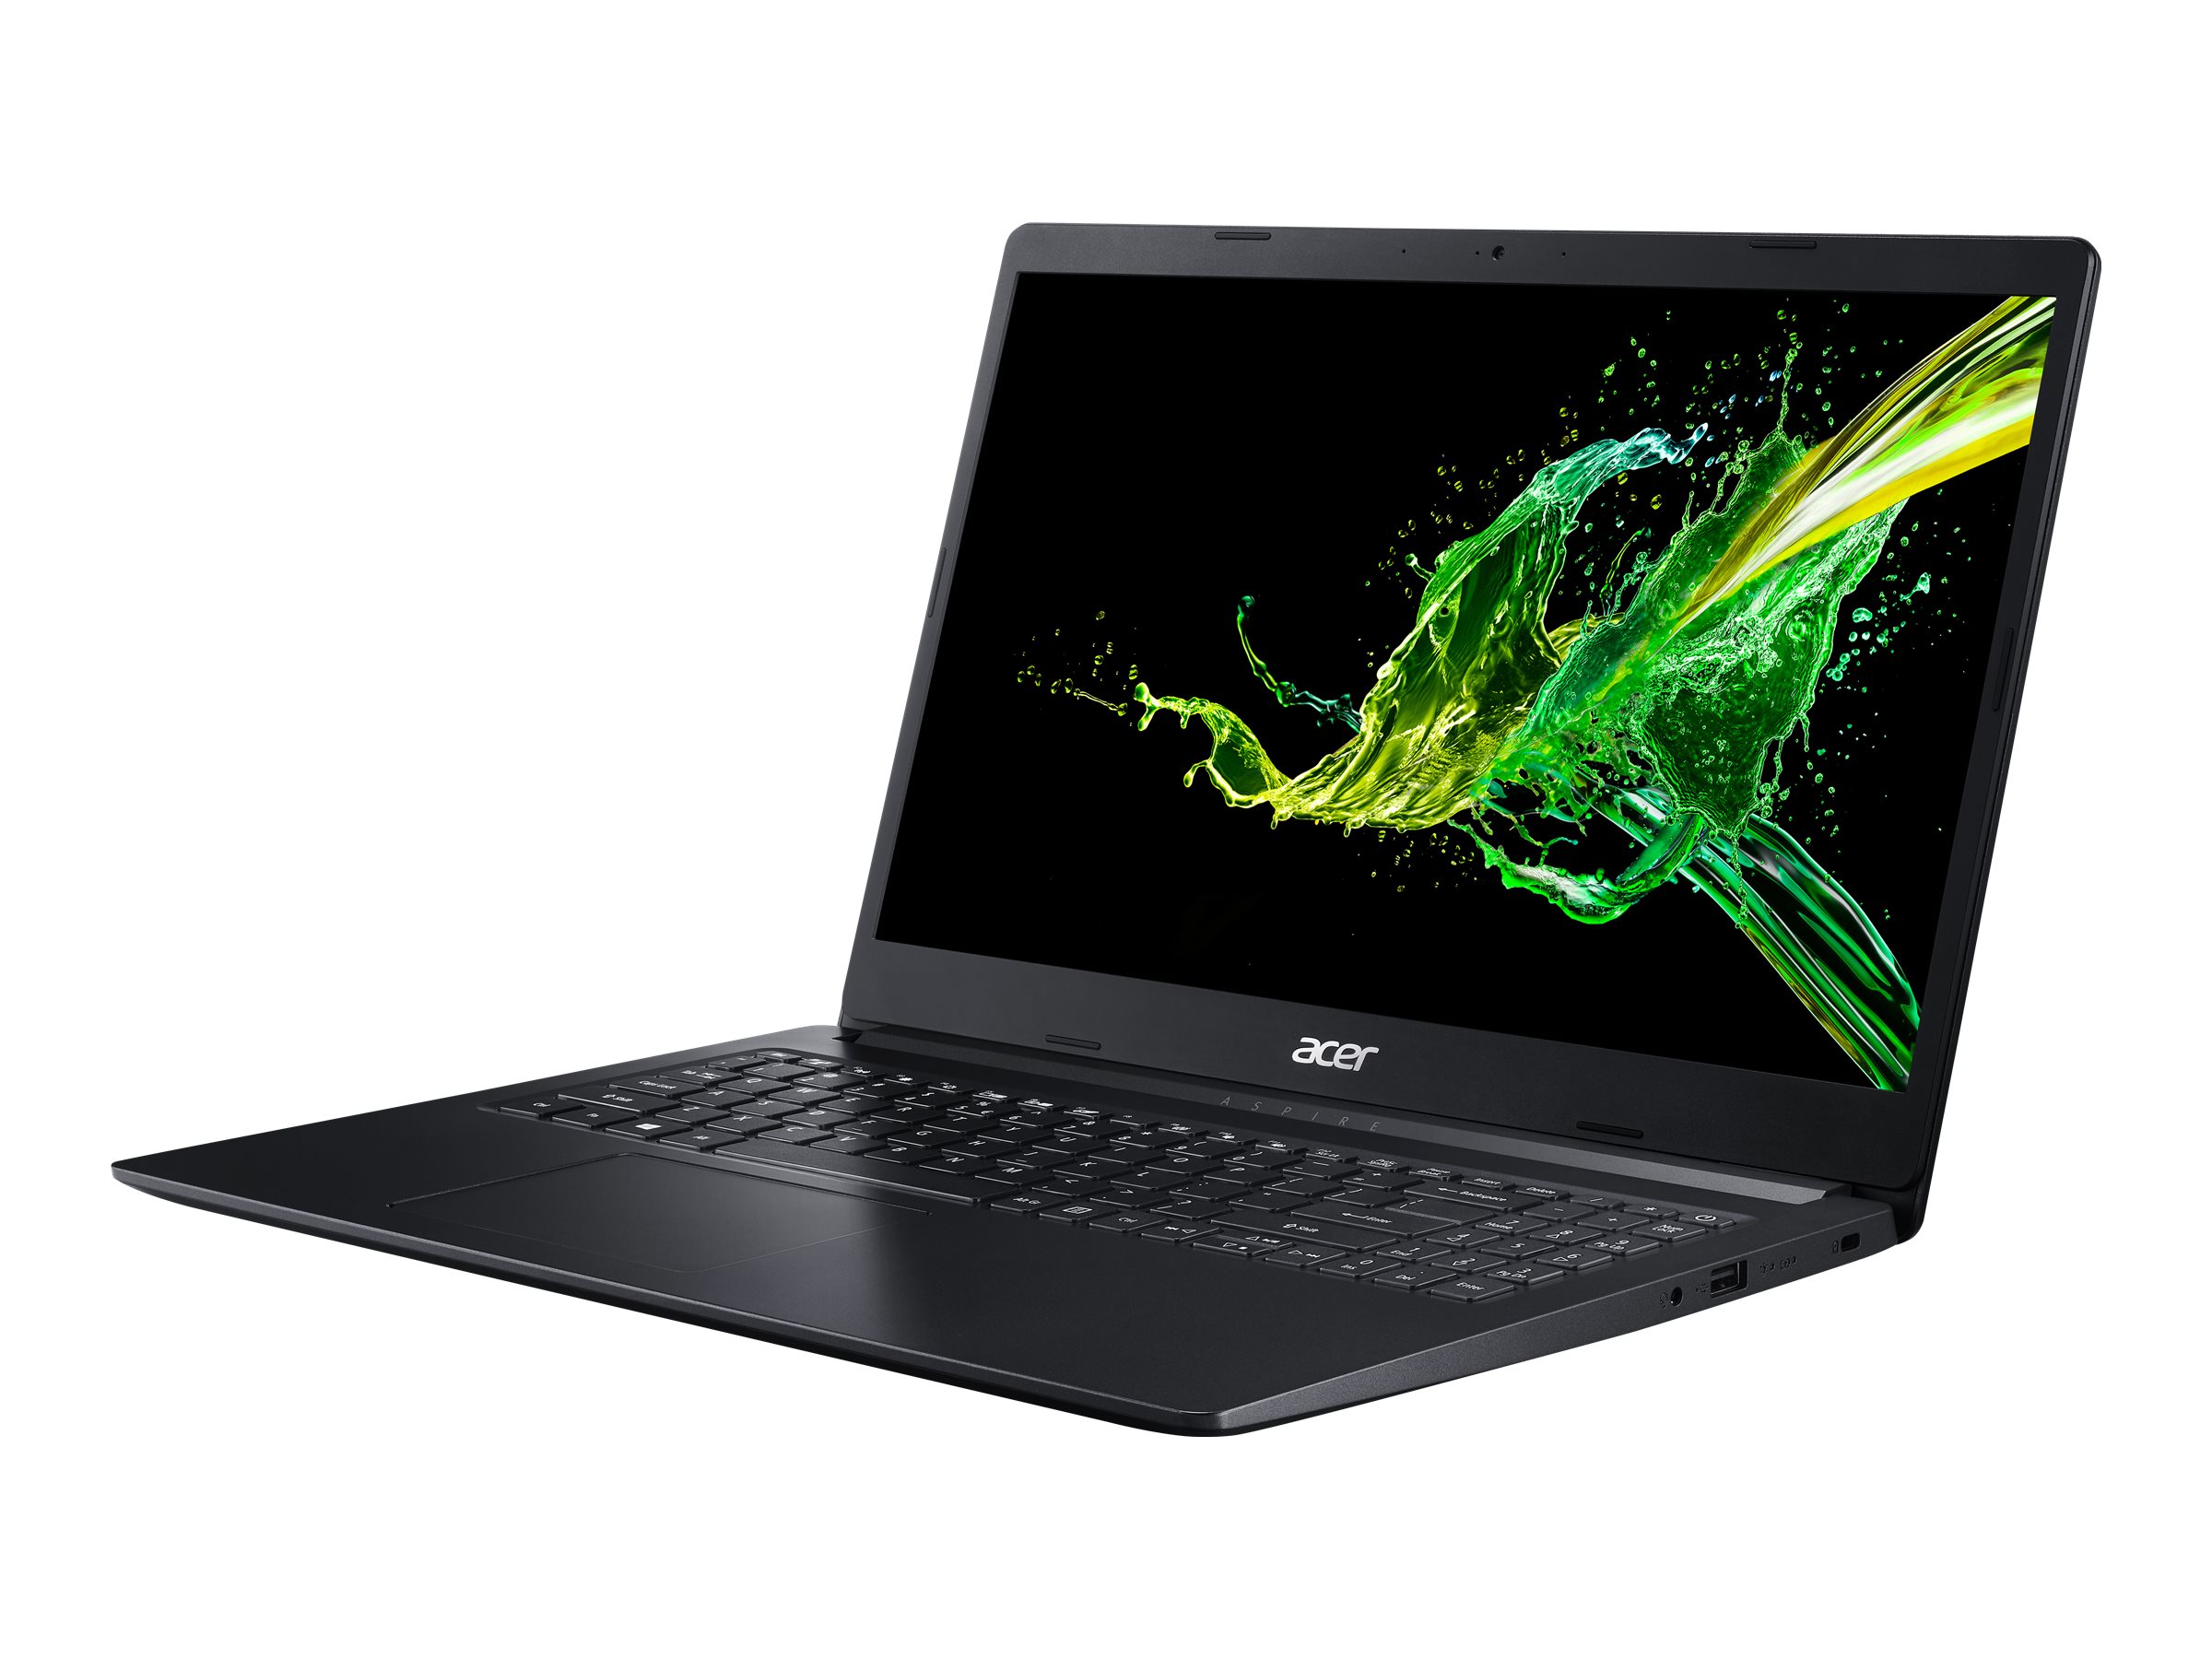 Acer Aspire 1 A115-31-C2Y3 15.6" FHD Laptop, Intel Celeron, 4GB RAM, 64GB SSD, Windows 10 Home in S mode, Charcoal Black, NX.HE4AA.003 - image 1 of 8